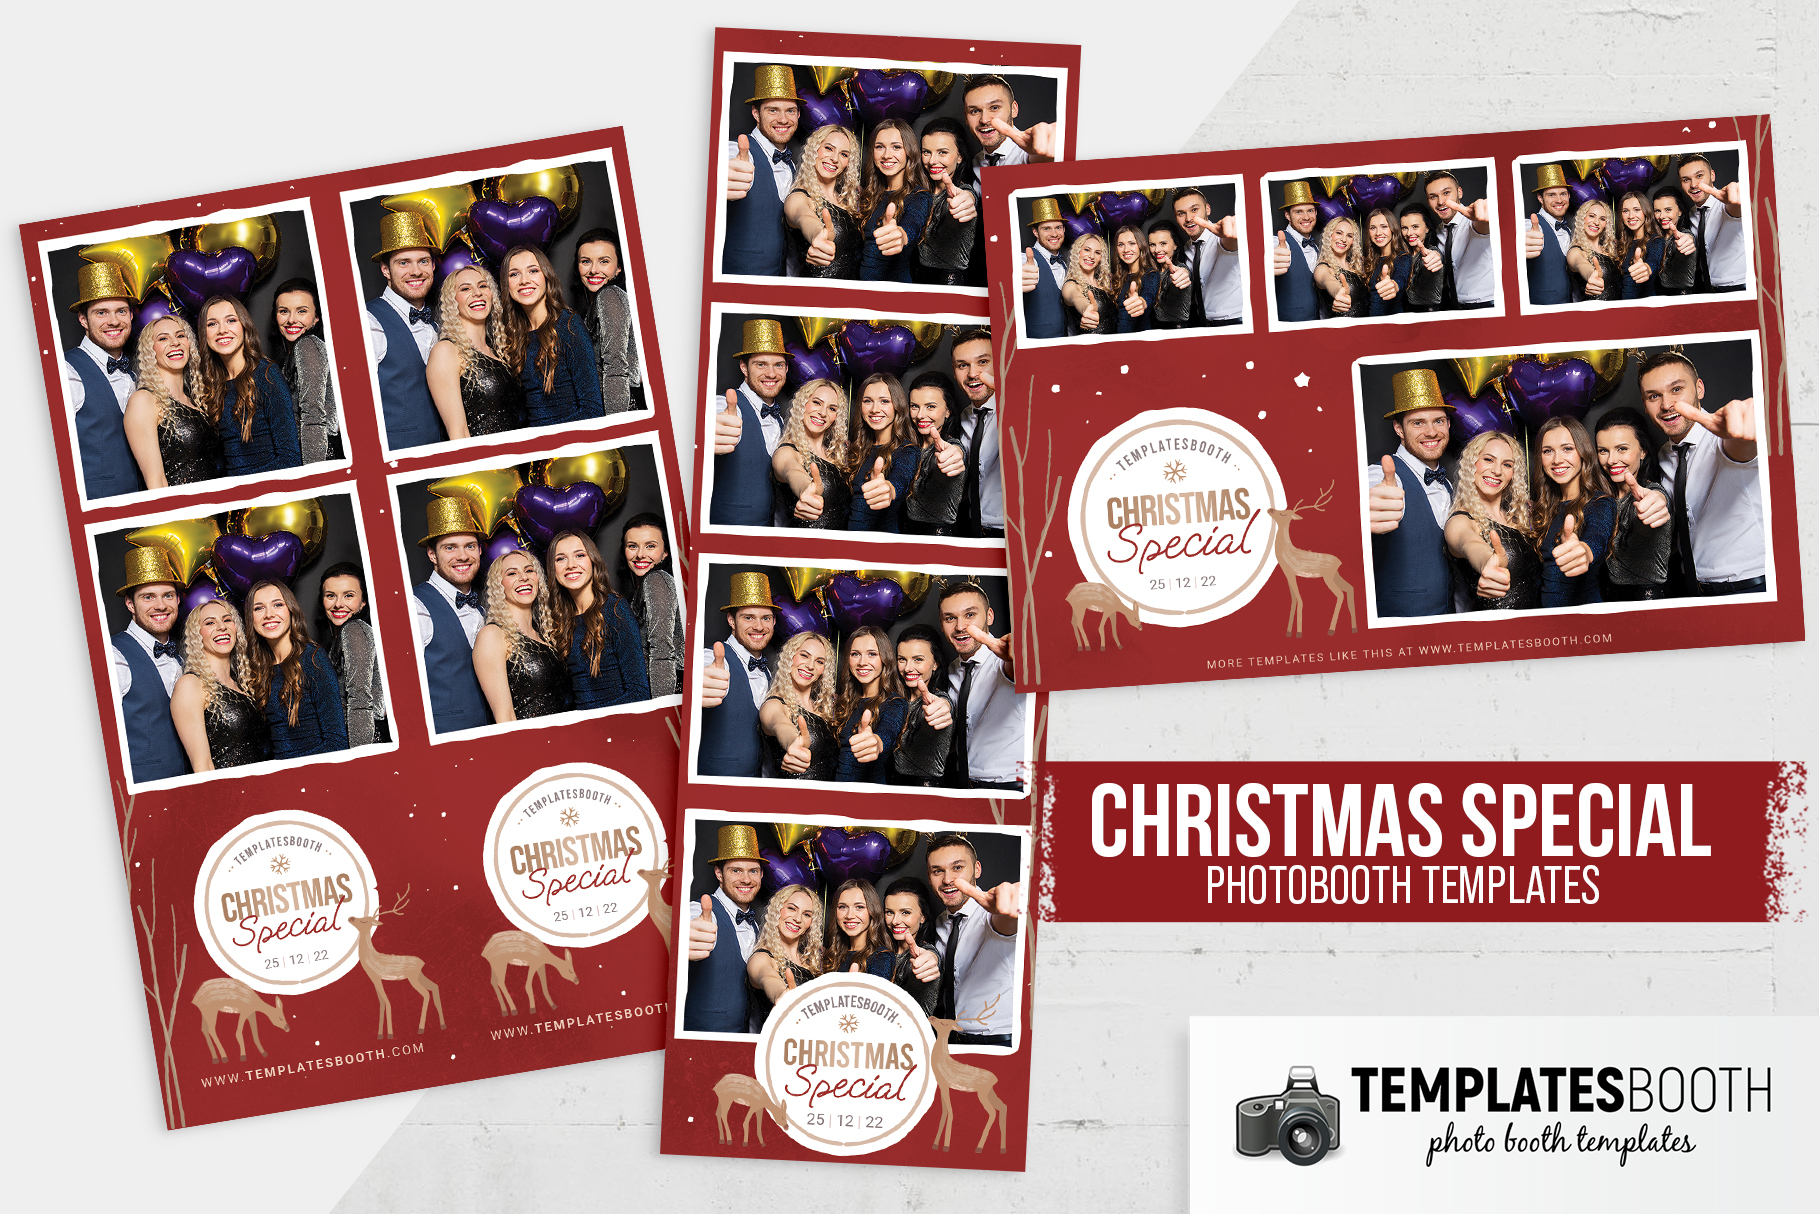 Christmas Special Photo Booth Template